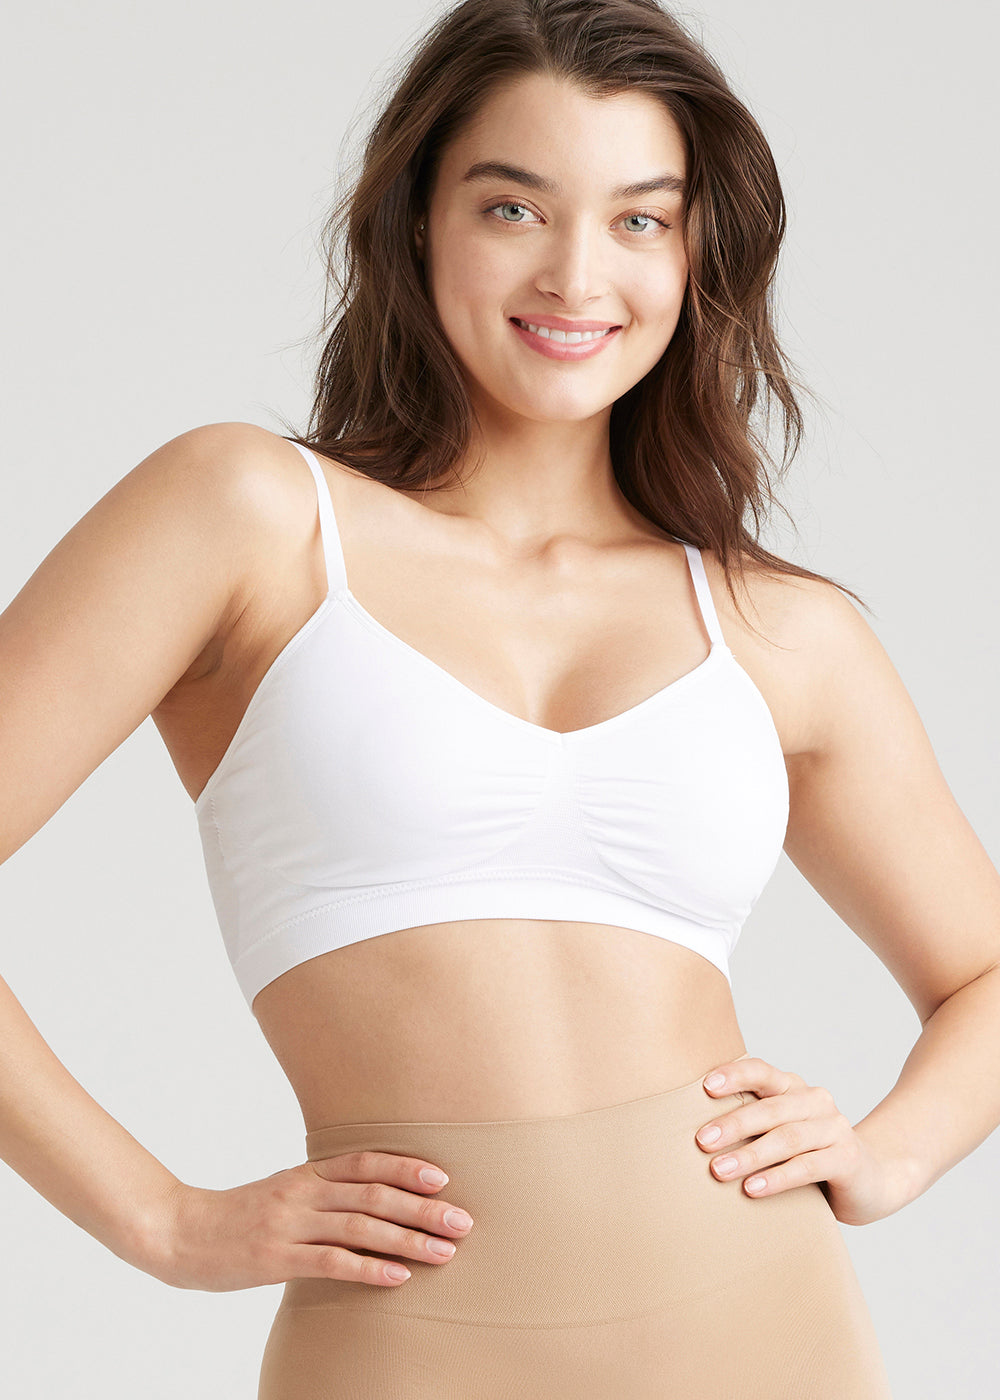 Questionthoughts on how this push up bra fits? It's a 32C, band